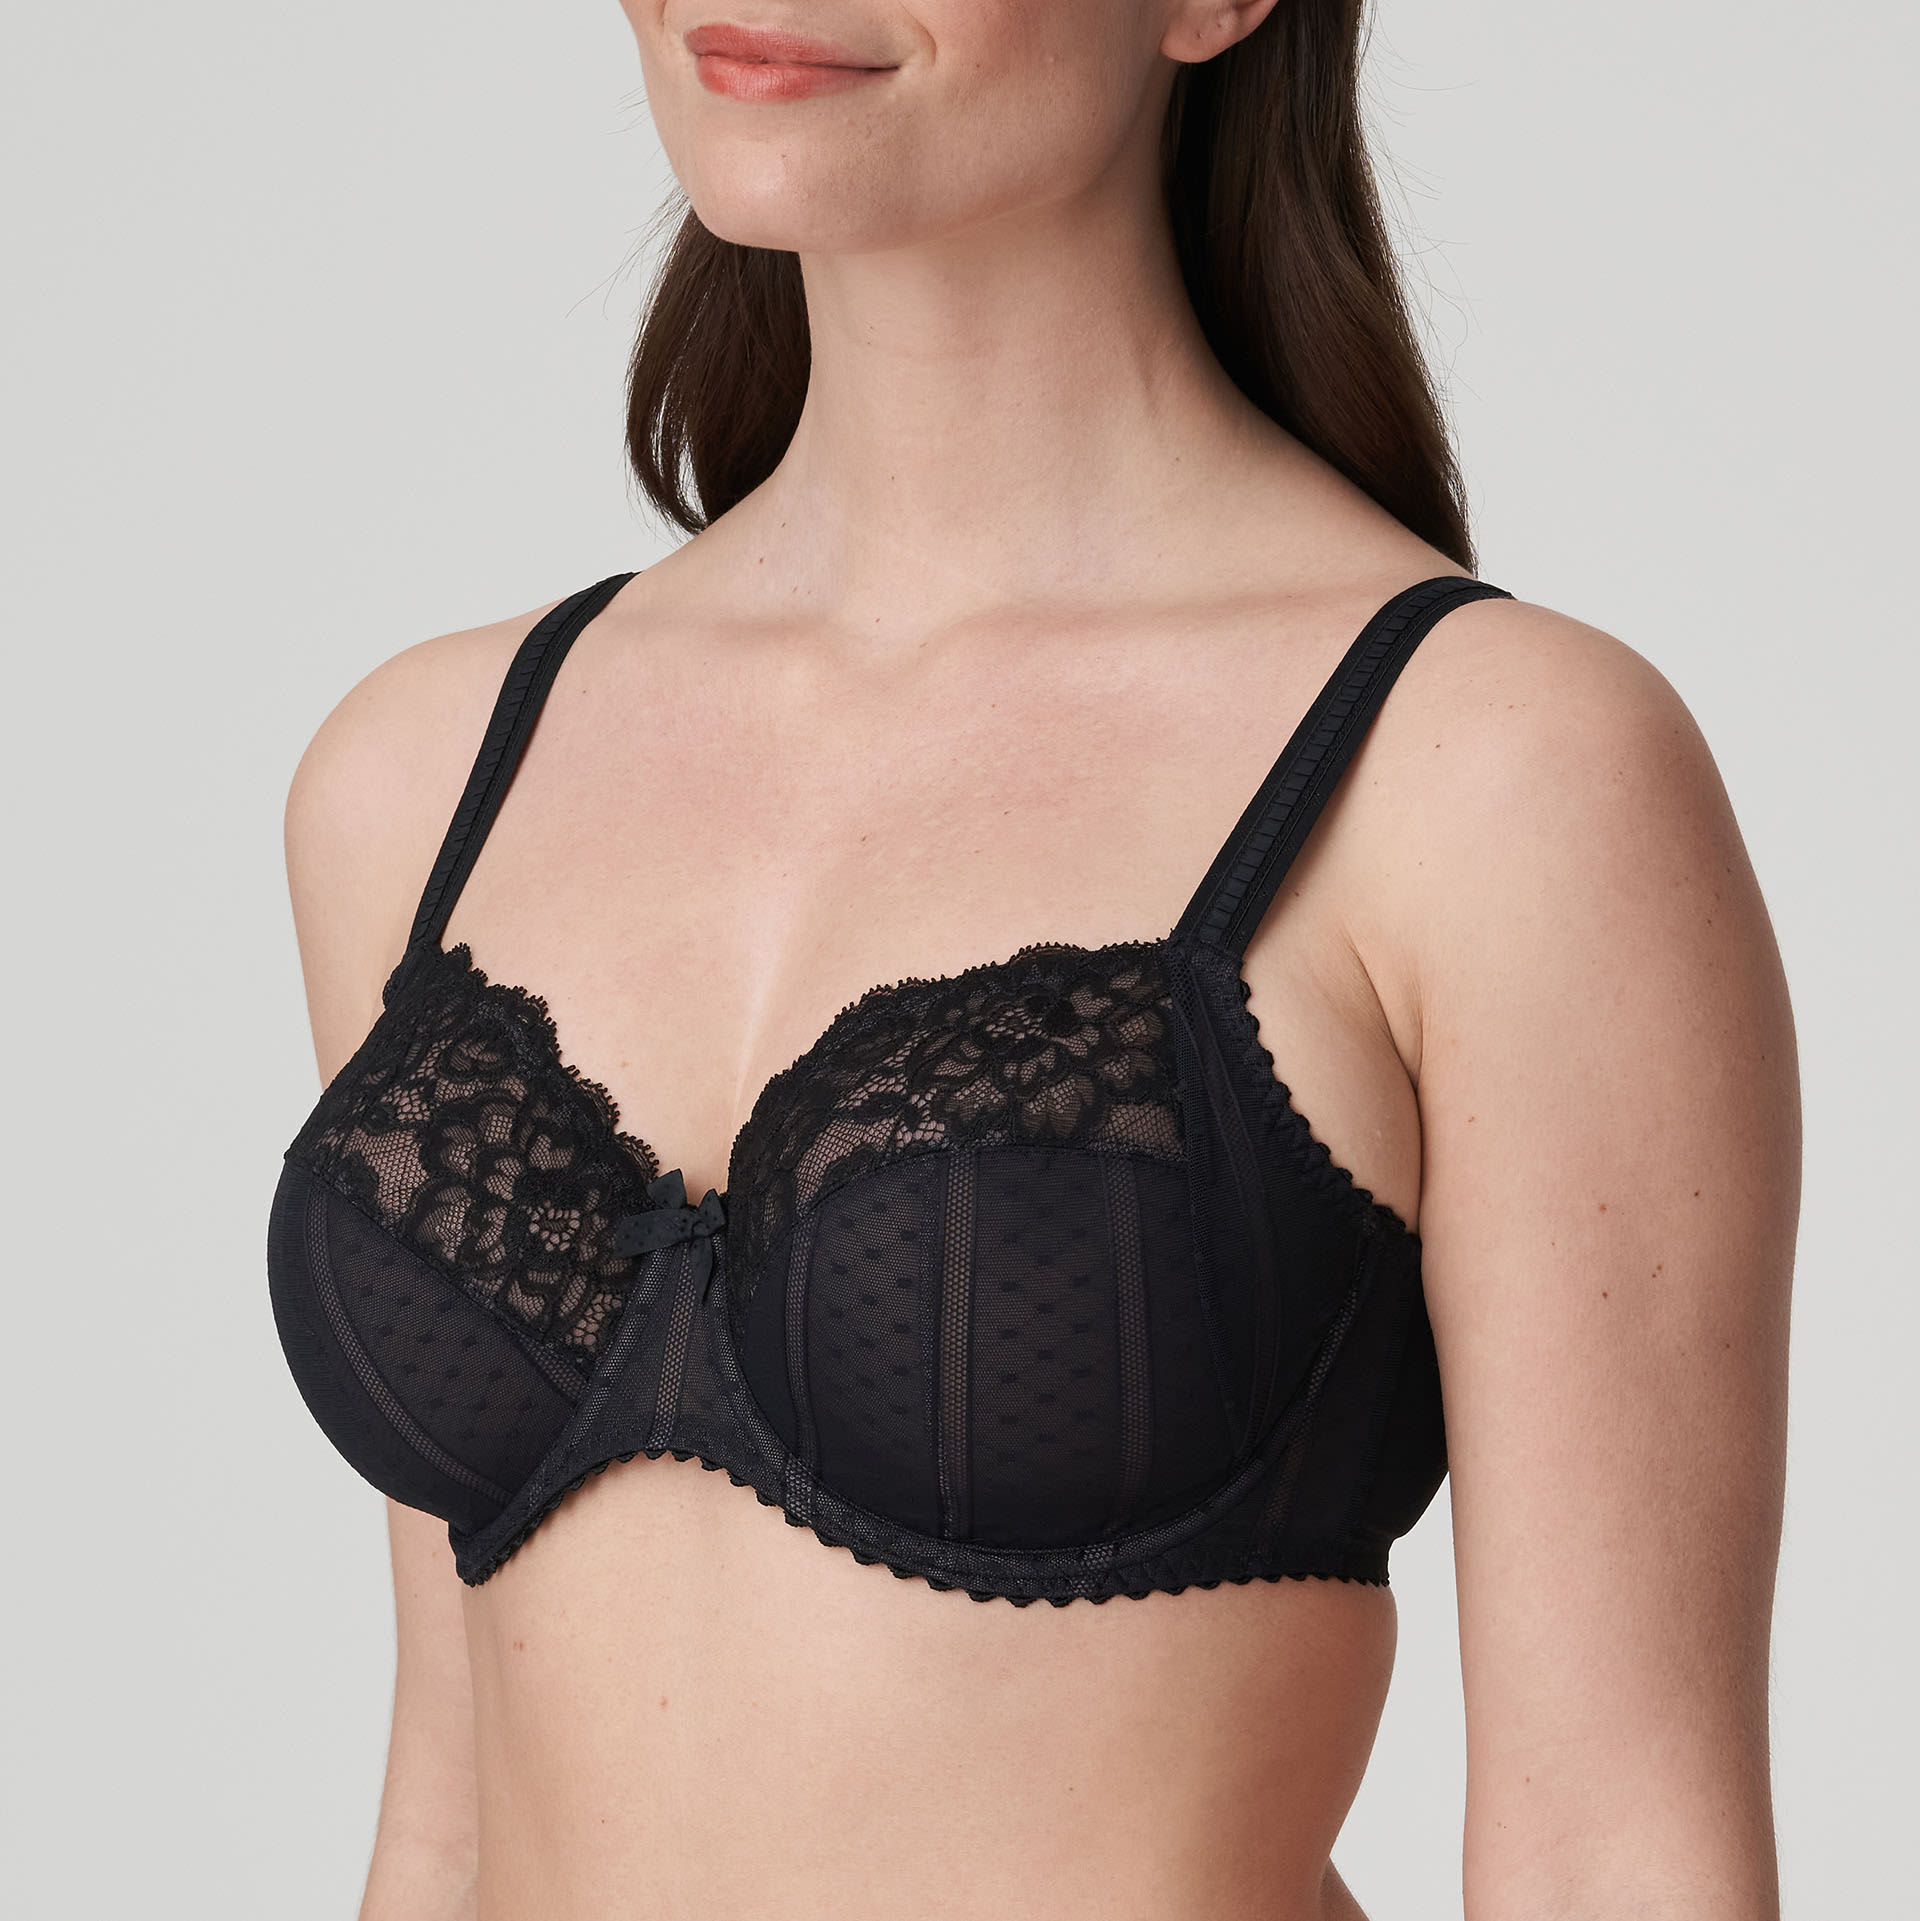 PrimaDonna Arthill Full Cup Bra in Black C To H Cup